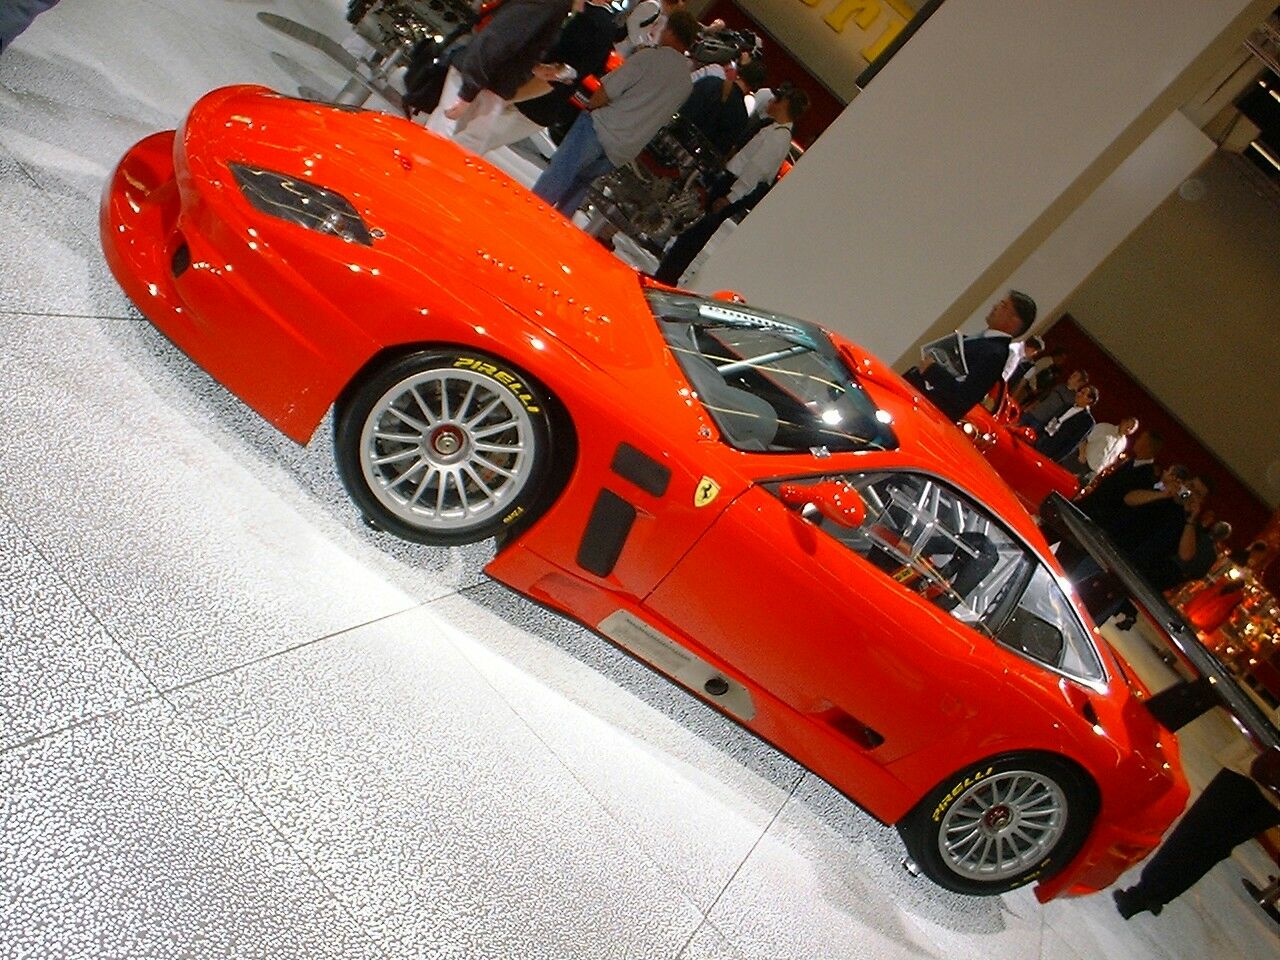 The Ferrari 575GTC is unveiled at the 2003 Frankfurt Motor Show